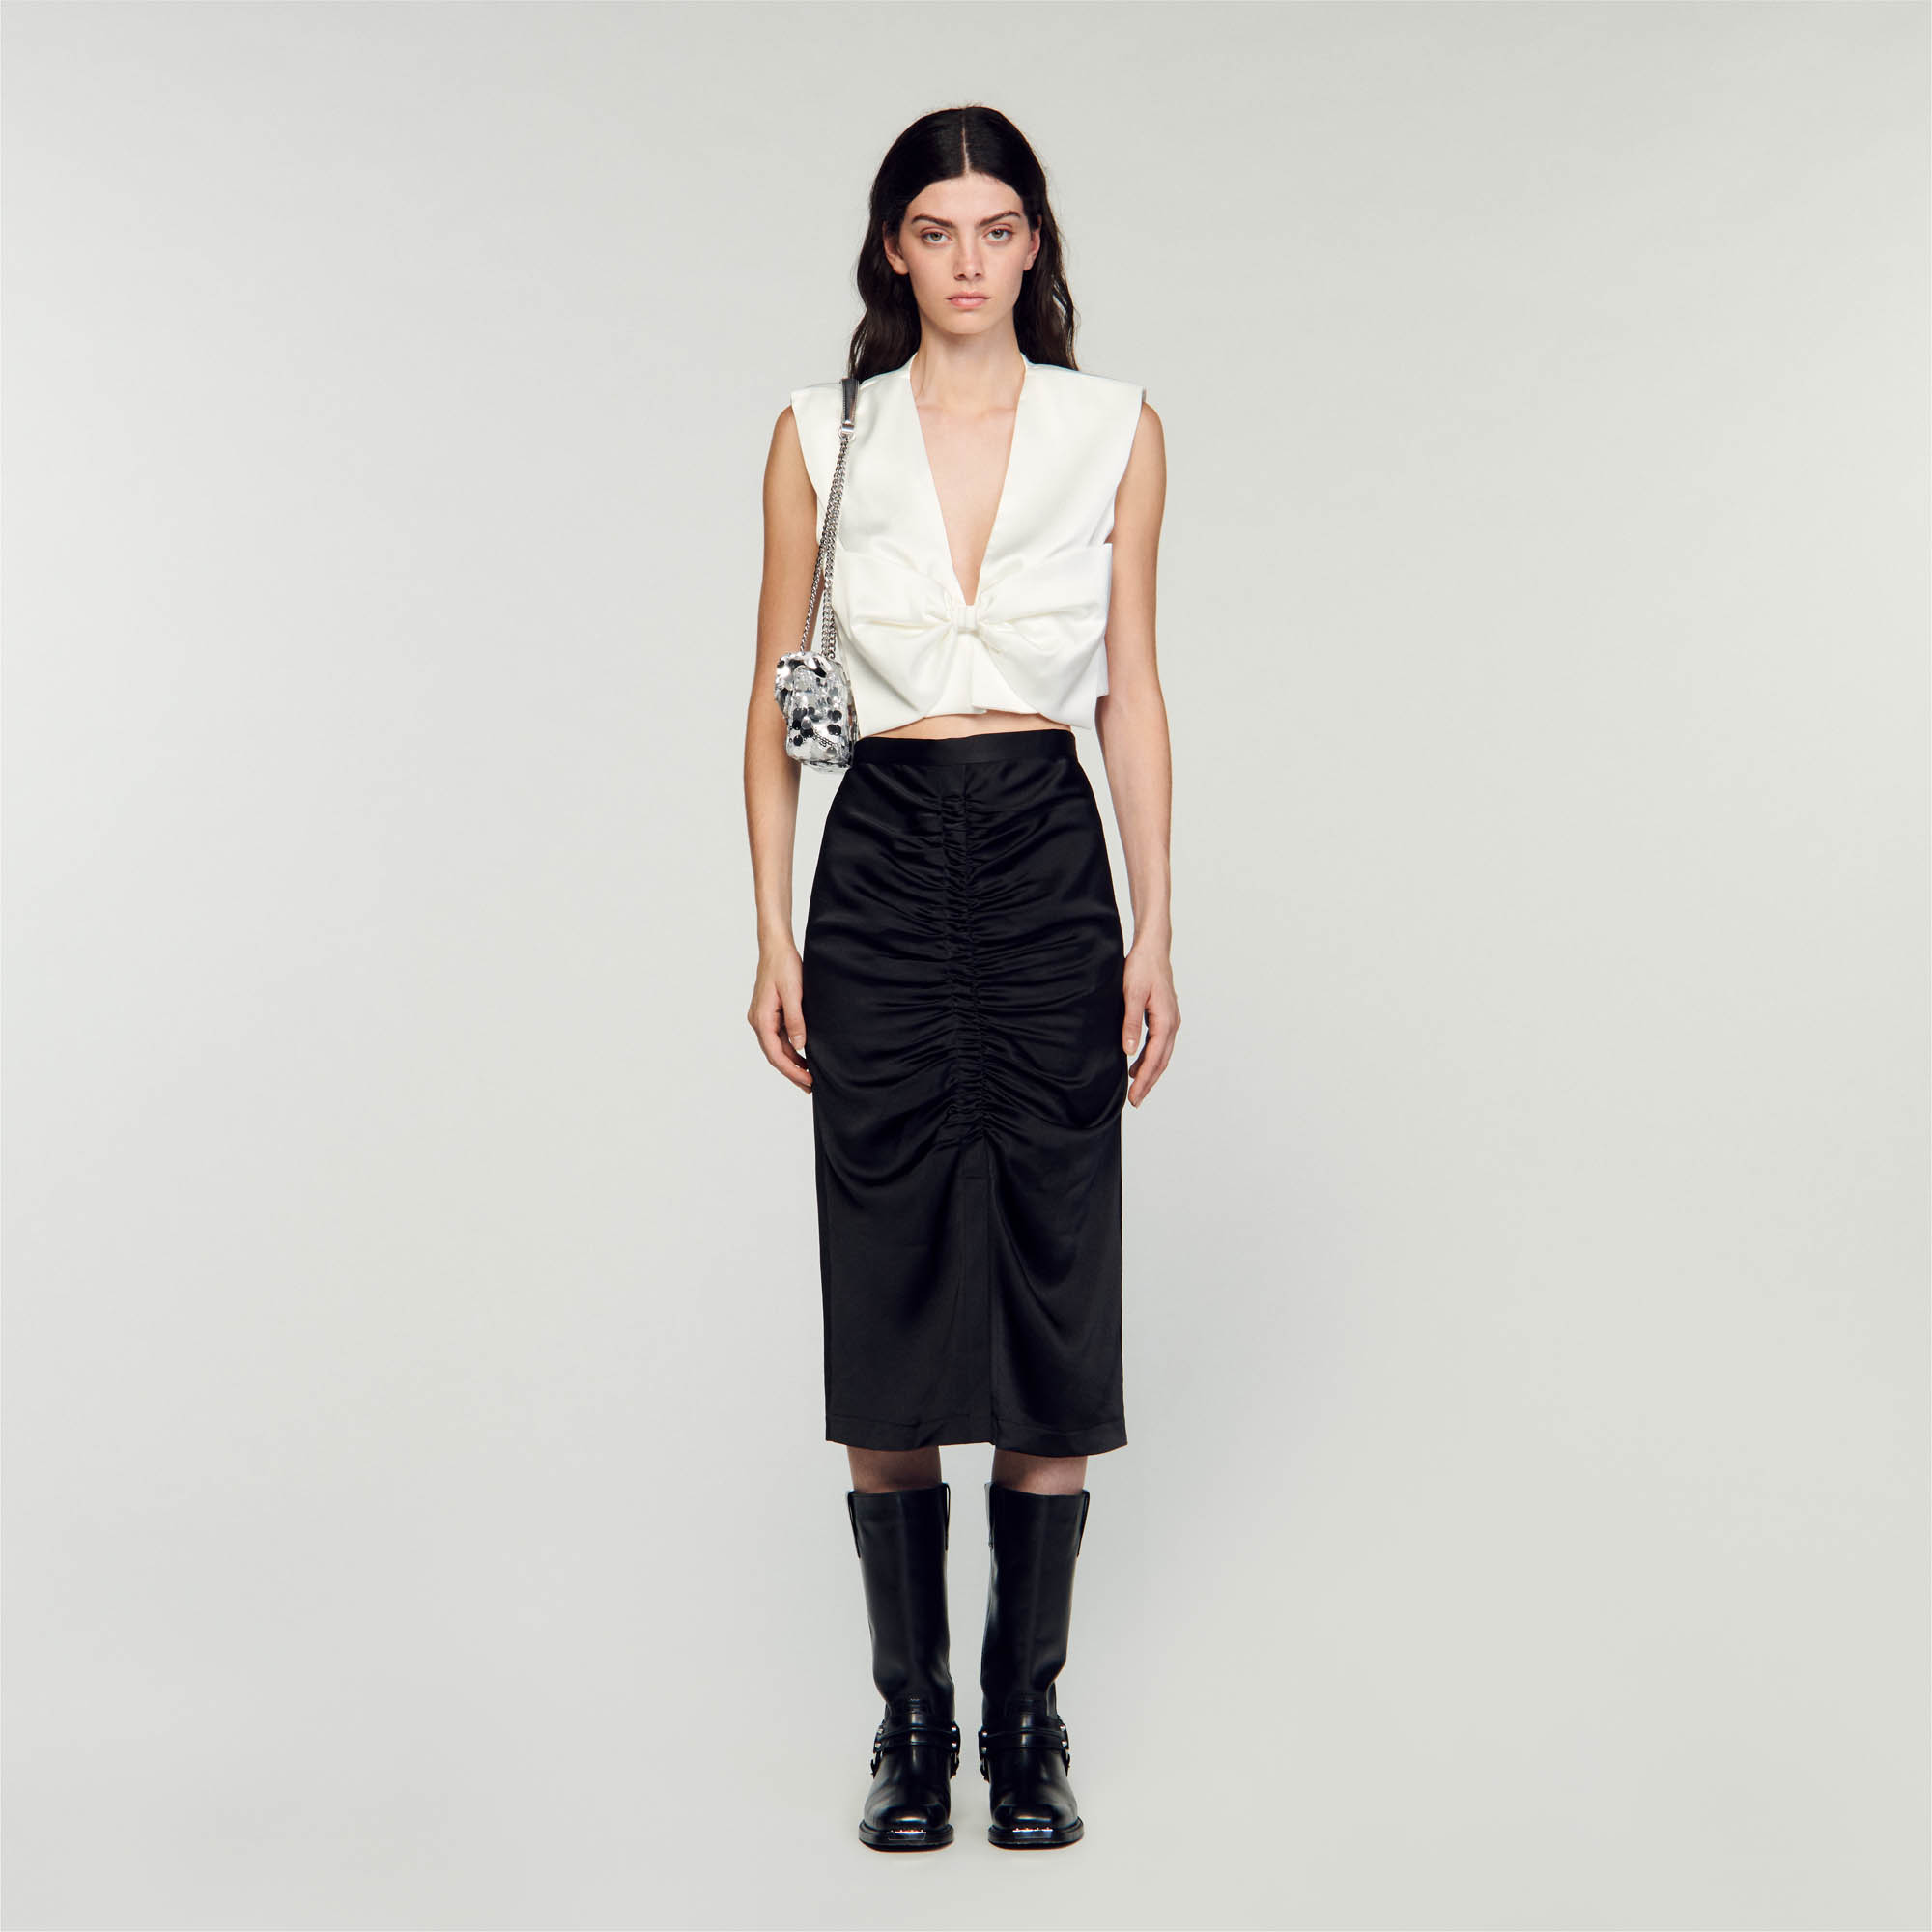 Sandro polyester Satin-effect midi skirt with drawstrings and front gather details and a front slit